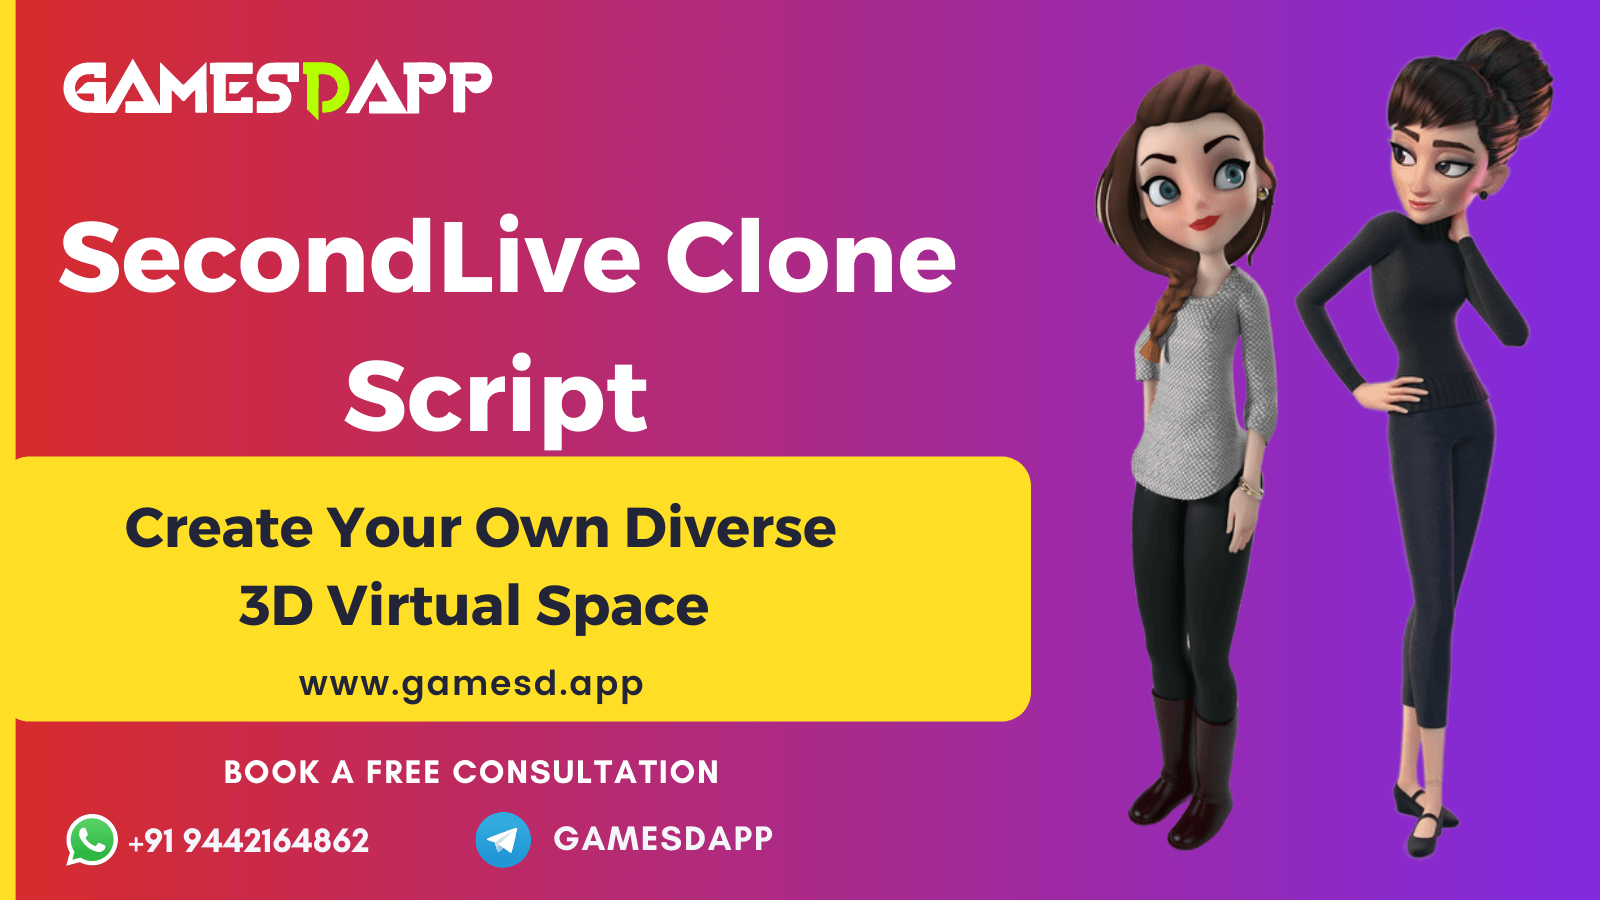 SecondLive Clone Script - To Launch a 3D Virtual Platform like SecondLive on BSC